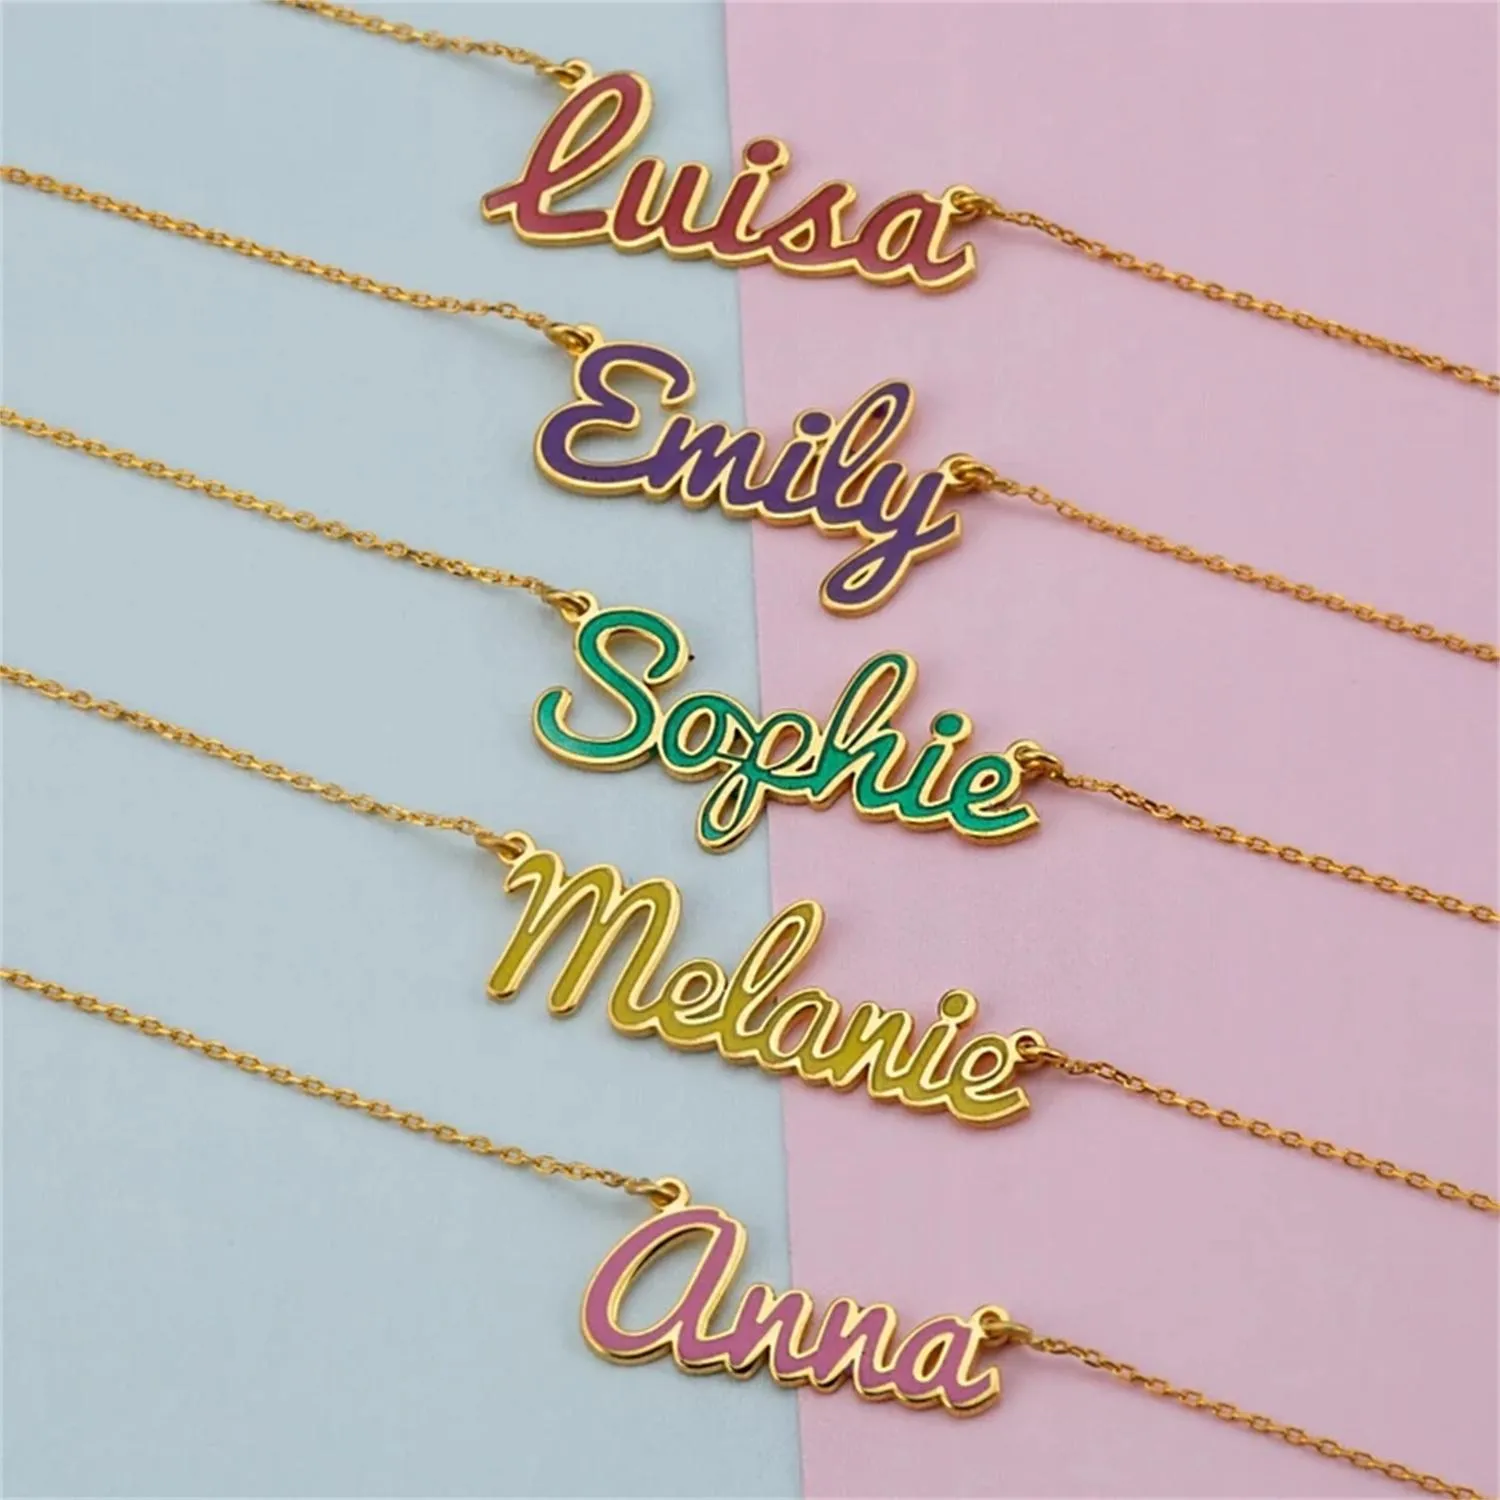 Necklaces Personalized Enamel Name Necklace Custom Colorful Pendant Red Purple Green Yellow Pink Customized Neamaplate Jewelry Gift ForHer